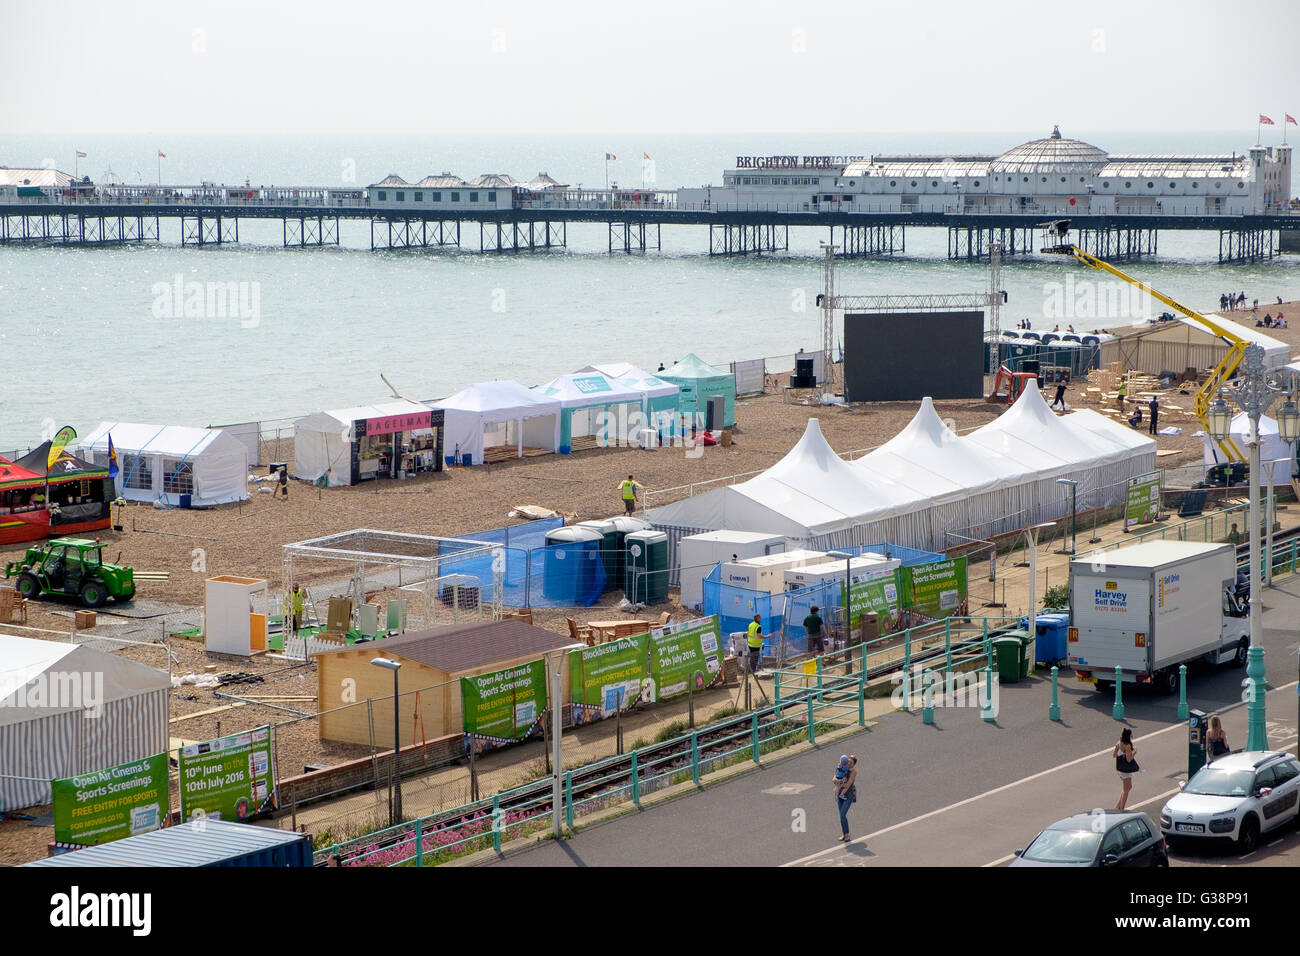 Brighton, UK. 8th June, 2016. With one day to go to the opening of the UEFA European Championships final preparations are being made to what will be a giant screen fan park on Brighton Beach.  This, Brighton's Big Screen, will also serve as the UK's largest open air beach front cinema on days when no football is scheduled.  Credit:  Scott Hortop/Alamy Live News Stock Photo